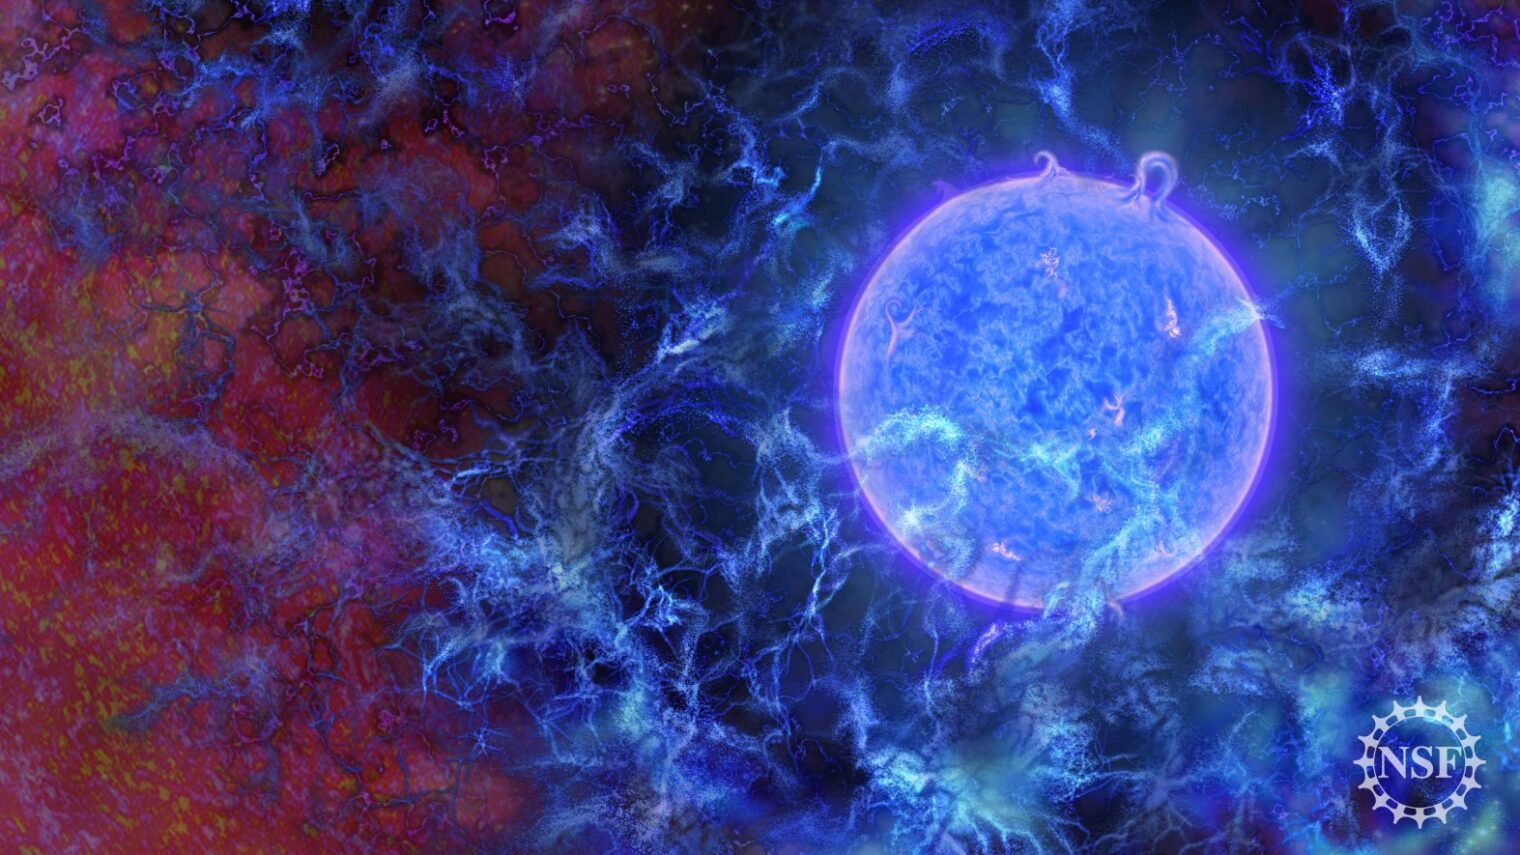 Artist's rendering of how the first stars in the universe may have looked. Image copyrighted by N.R. Fuller/National Science Foundation, courtesy of CSIRO, Australia